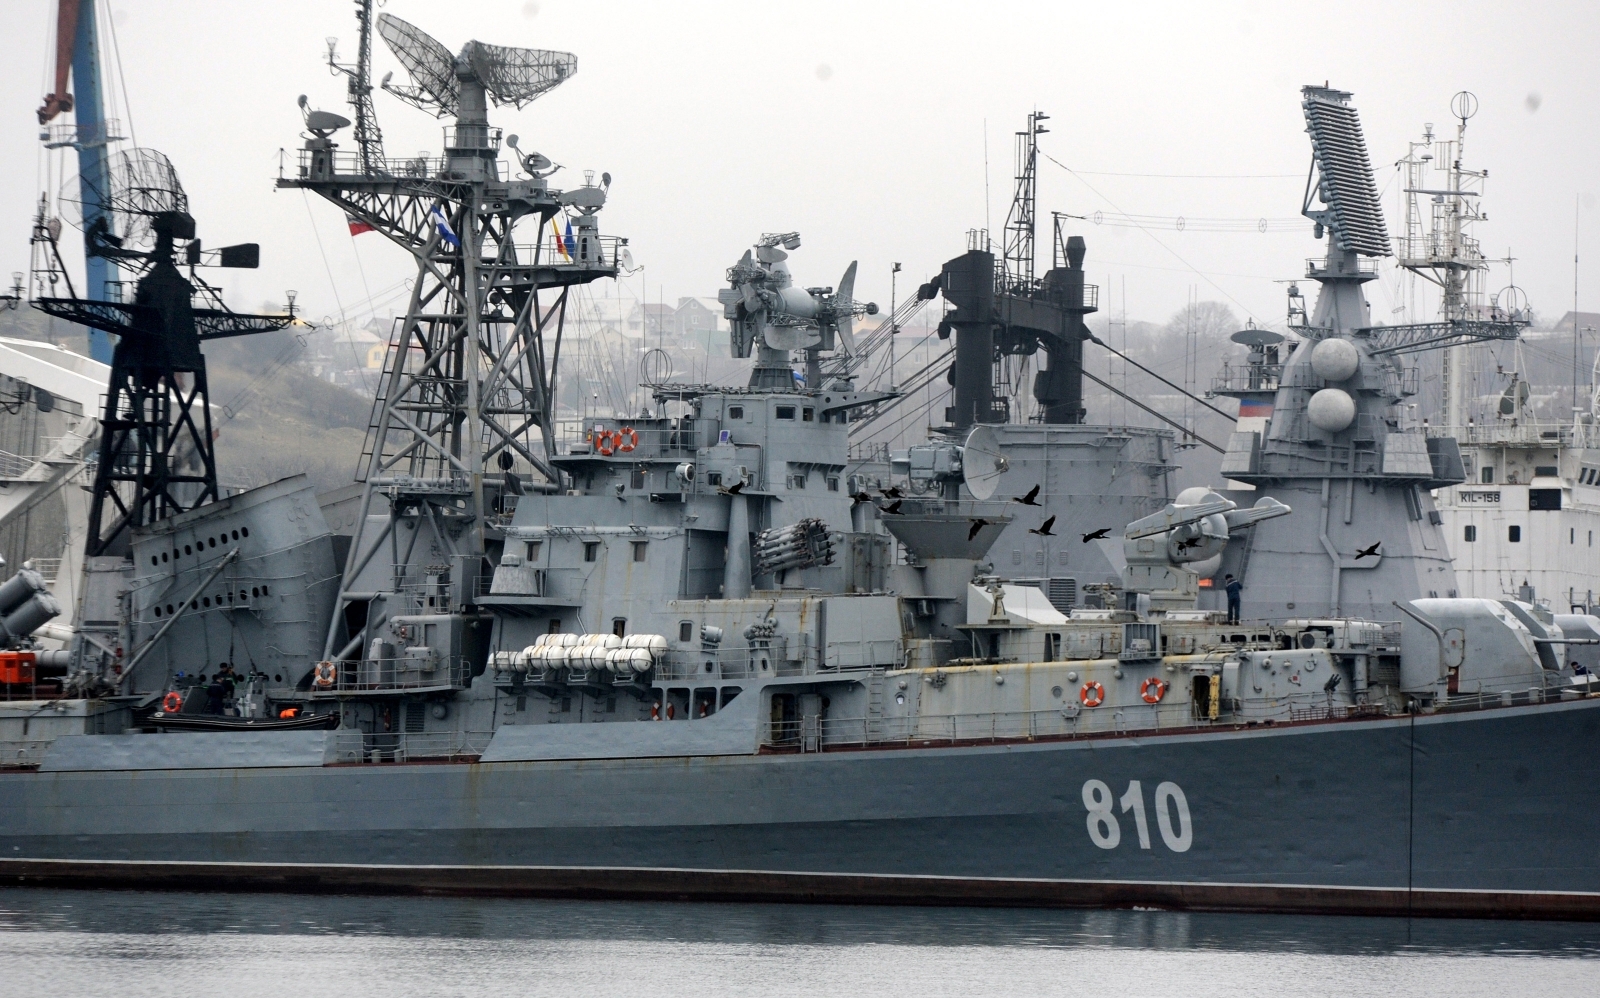 Russian Navy will soon field a large amphibious ship that can carry 13